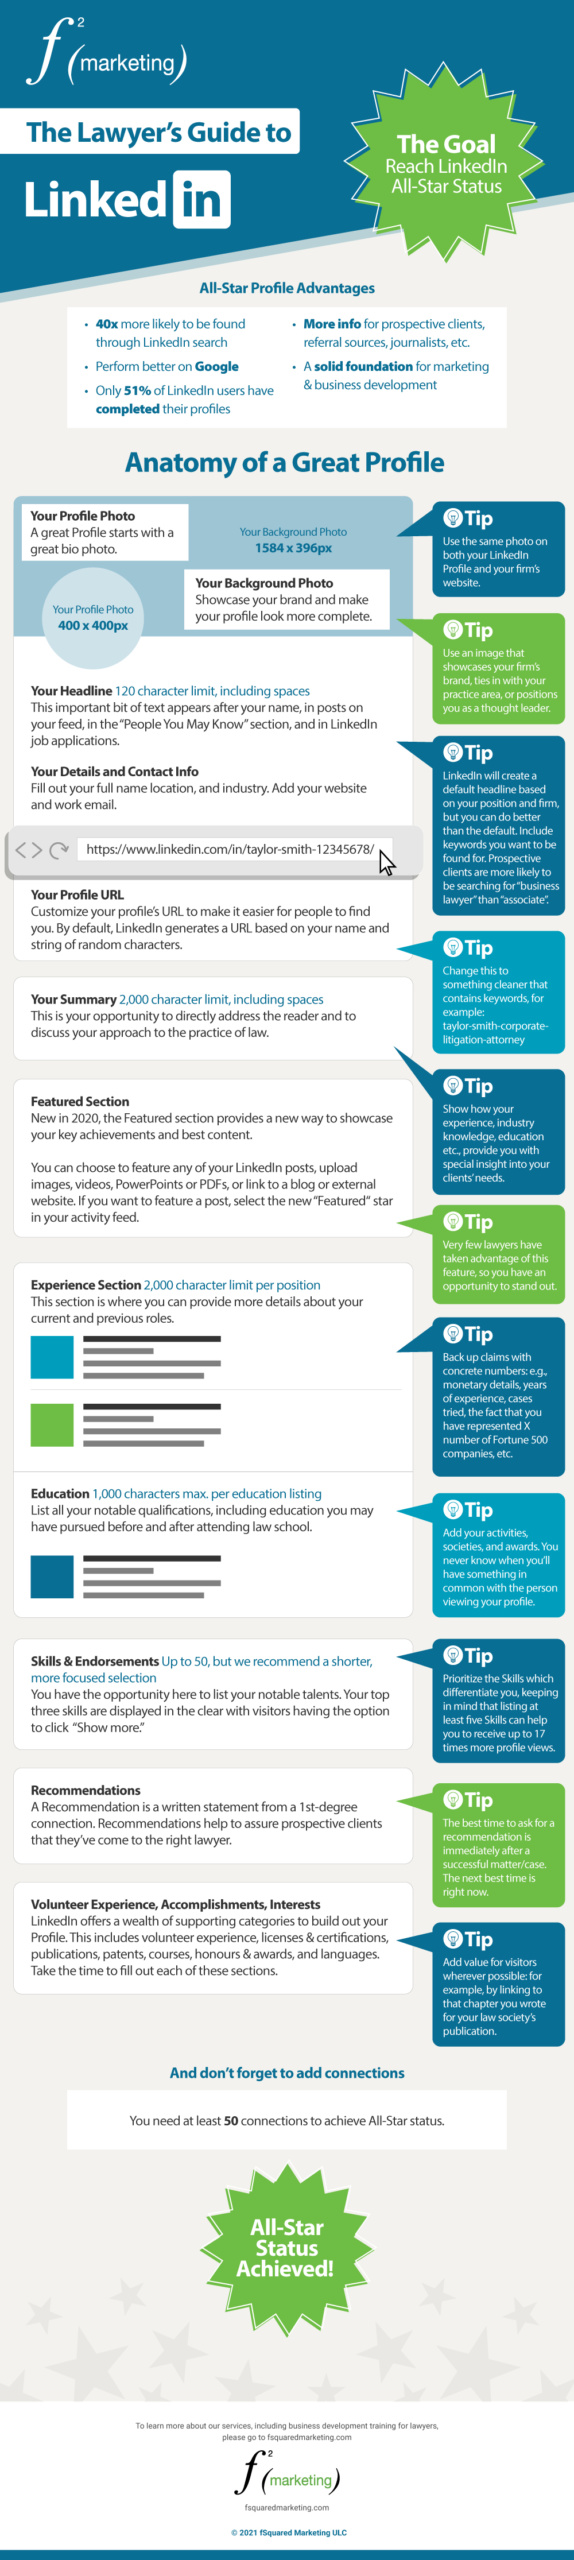 The Lawyer's Guide to LinkedIn - Infographic